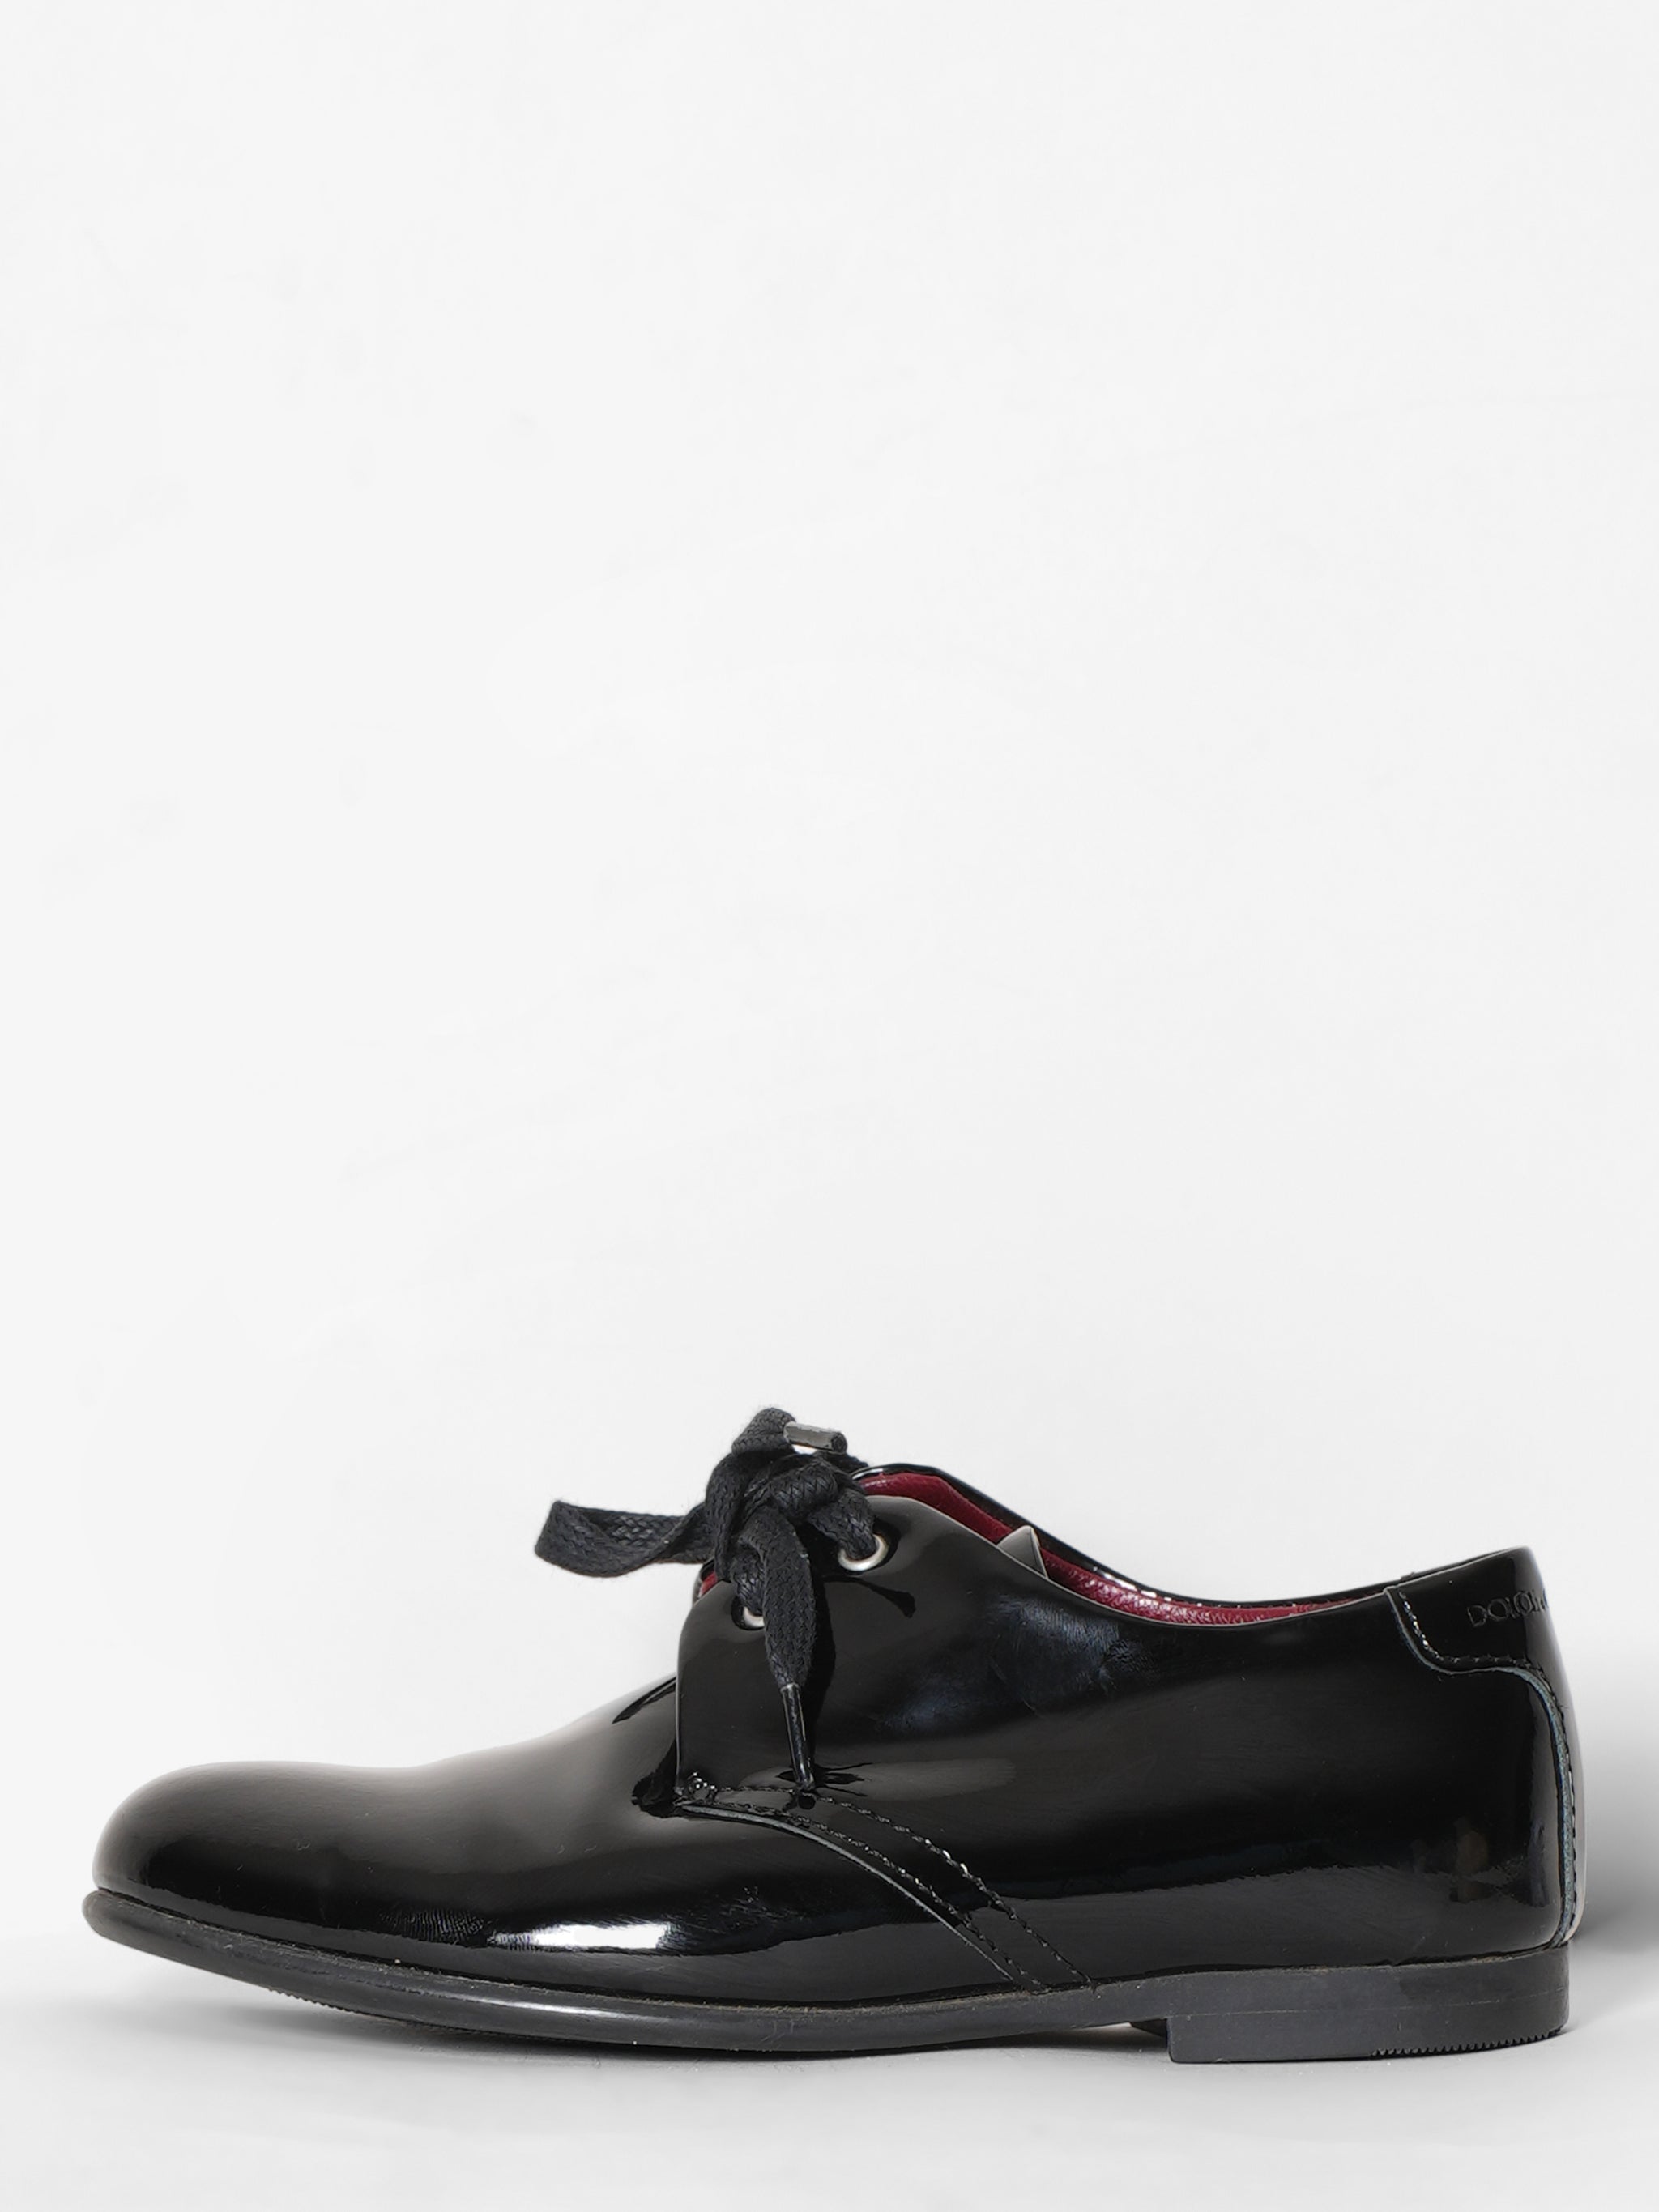 Dolce & Gabbana Pointed Black Toe Shoes